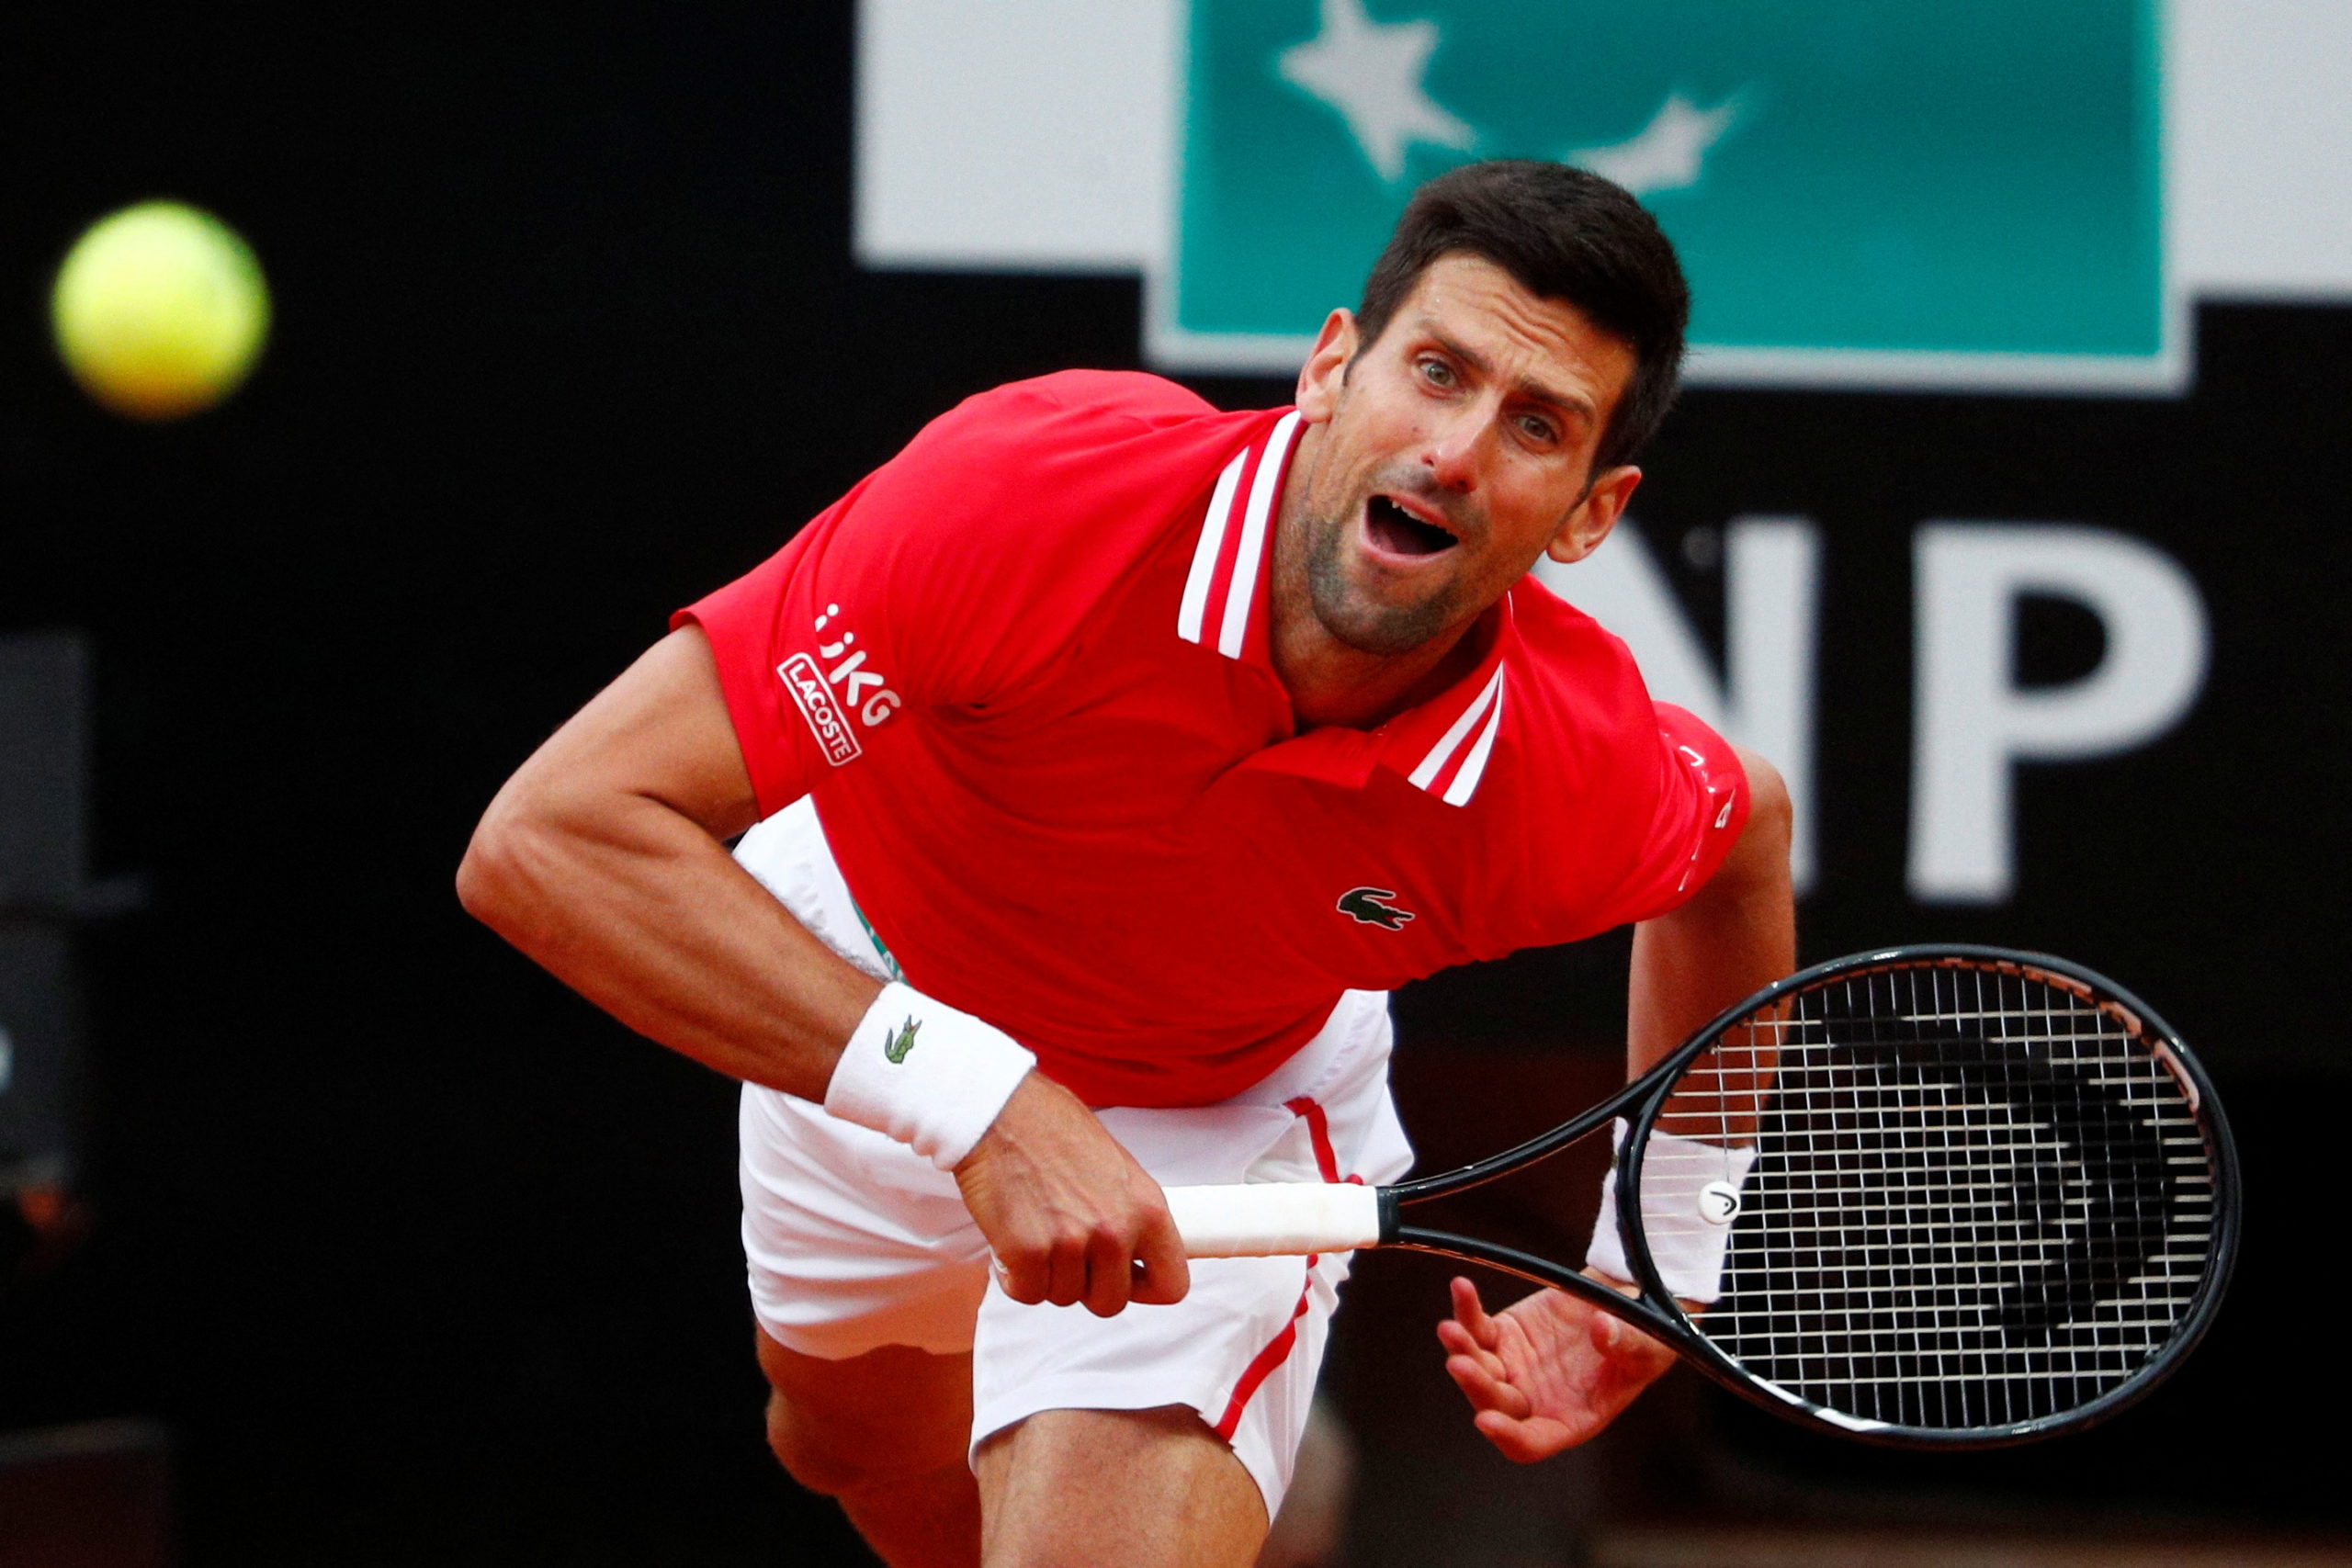 FILE PHOTO: Tennis - ATP Masters 1000 - Italian Open - Foro Italico, Rome, Italy - May 16, 2021 Serbia's Novak Djokovic in action during his final match against Spain's Rafael Nadal 